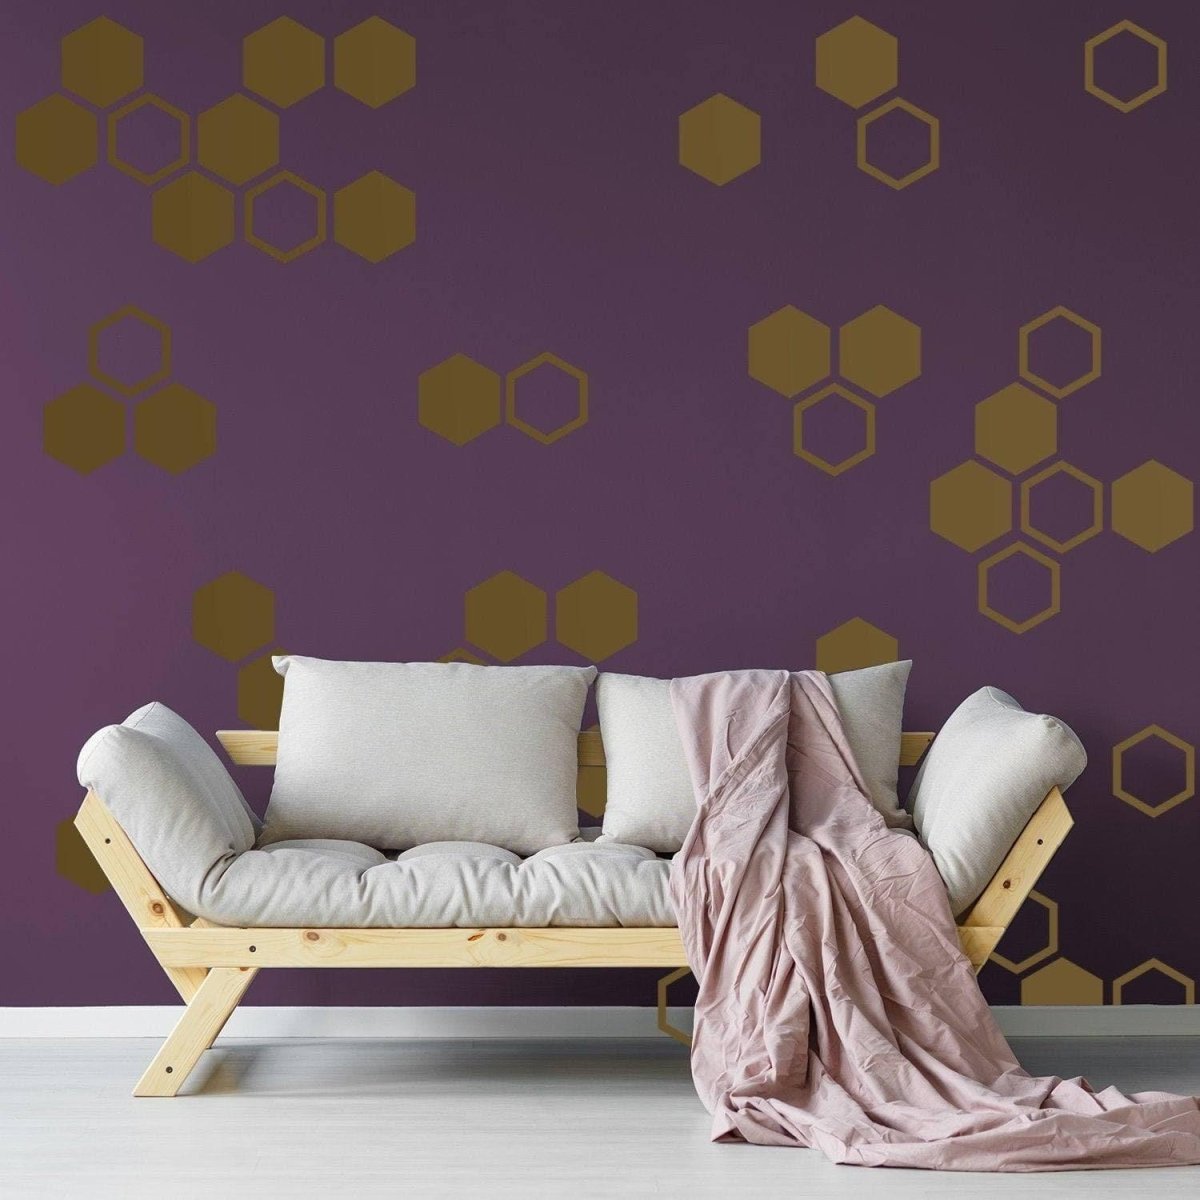 Set of 12 Acrylic Hexagonal Wall Stickers Plastic Mirrors for Home Decor,  Living Room, Bedroom, Above Sofa or Golden TV